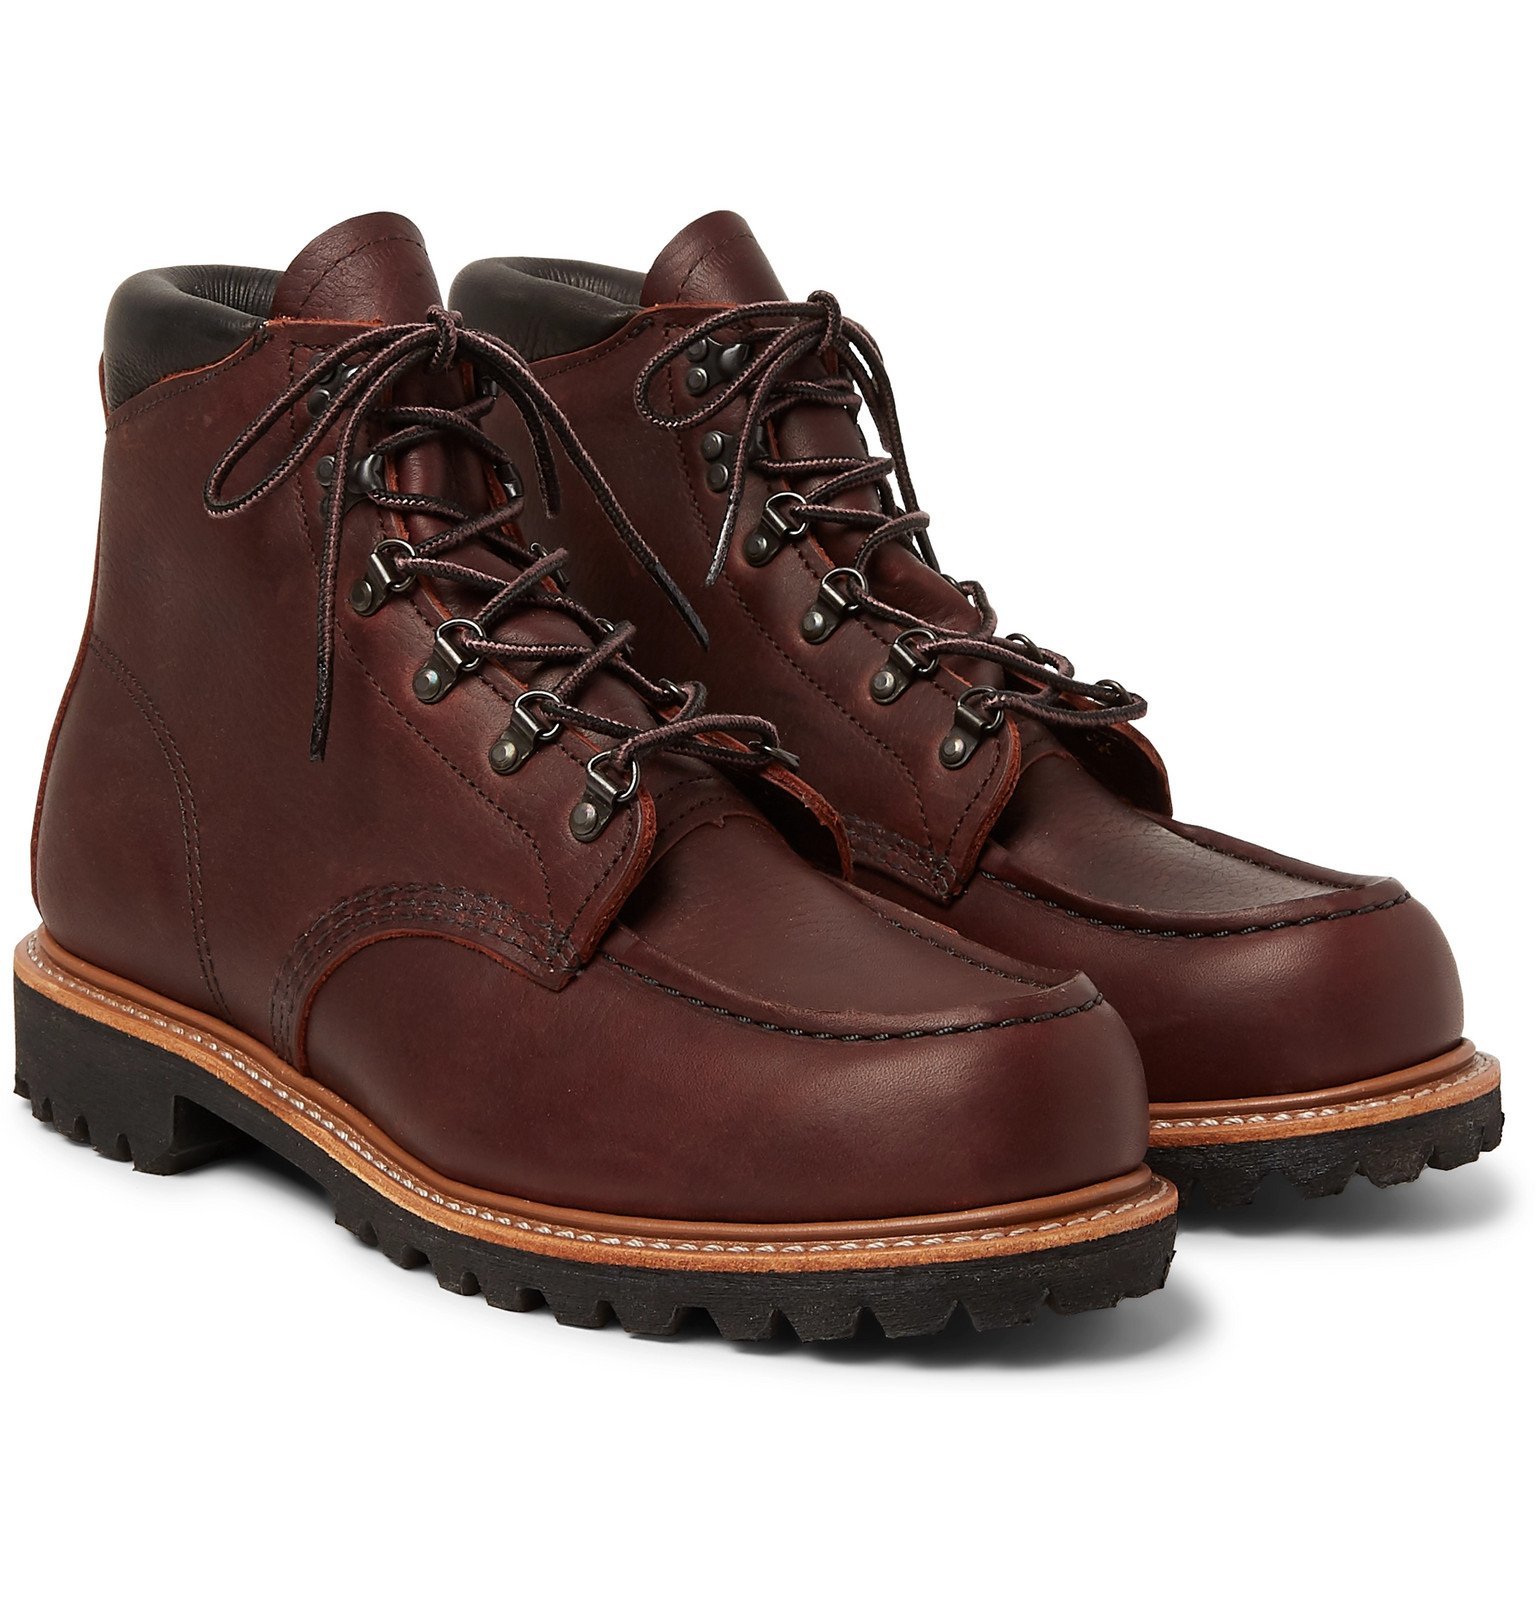 Red Wing Shoes - 2927 Sawmill Leather Boots - Brown Red Wing Shoes